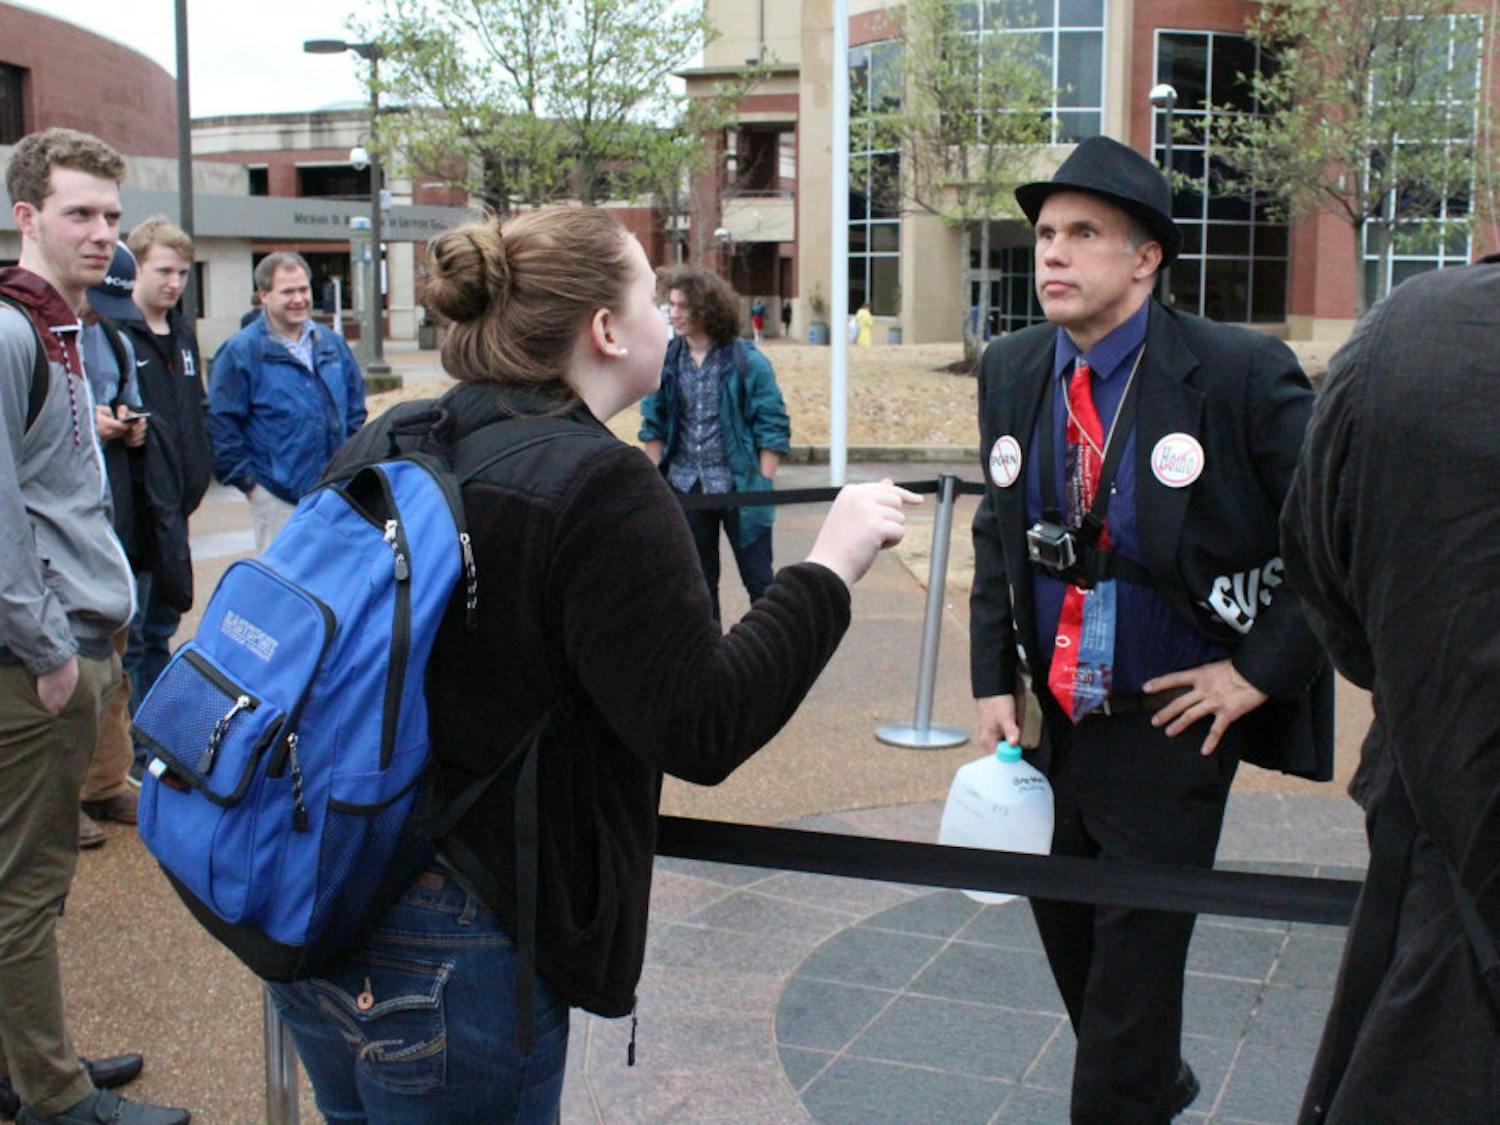 Religious protester returns to student plaza